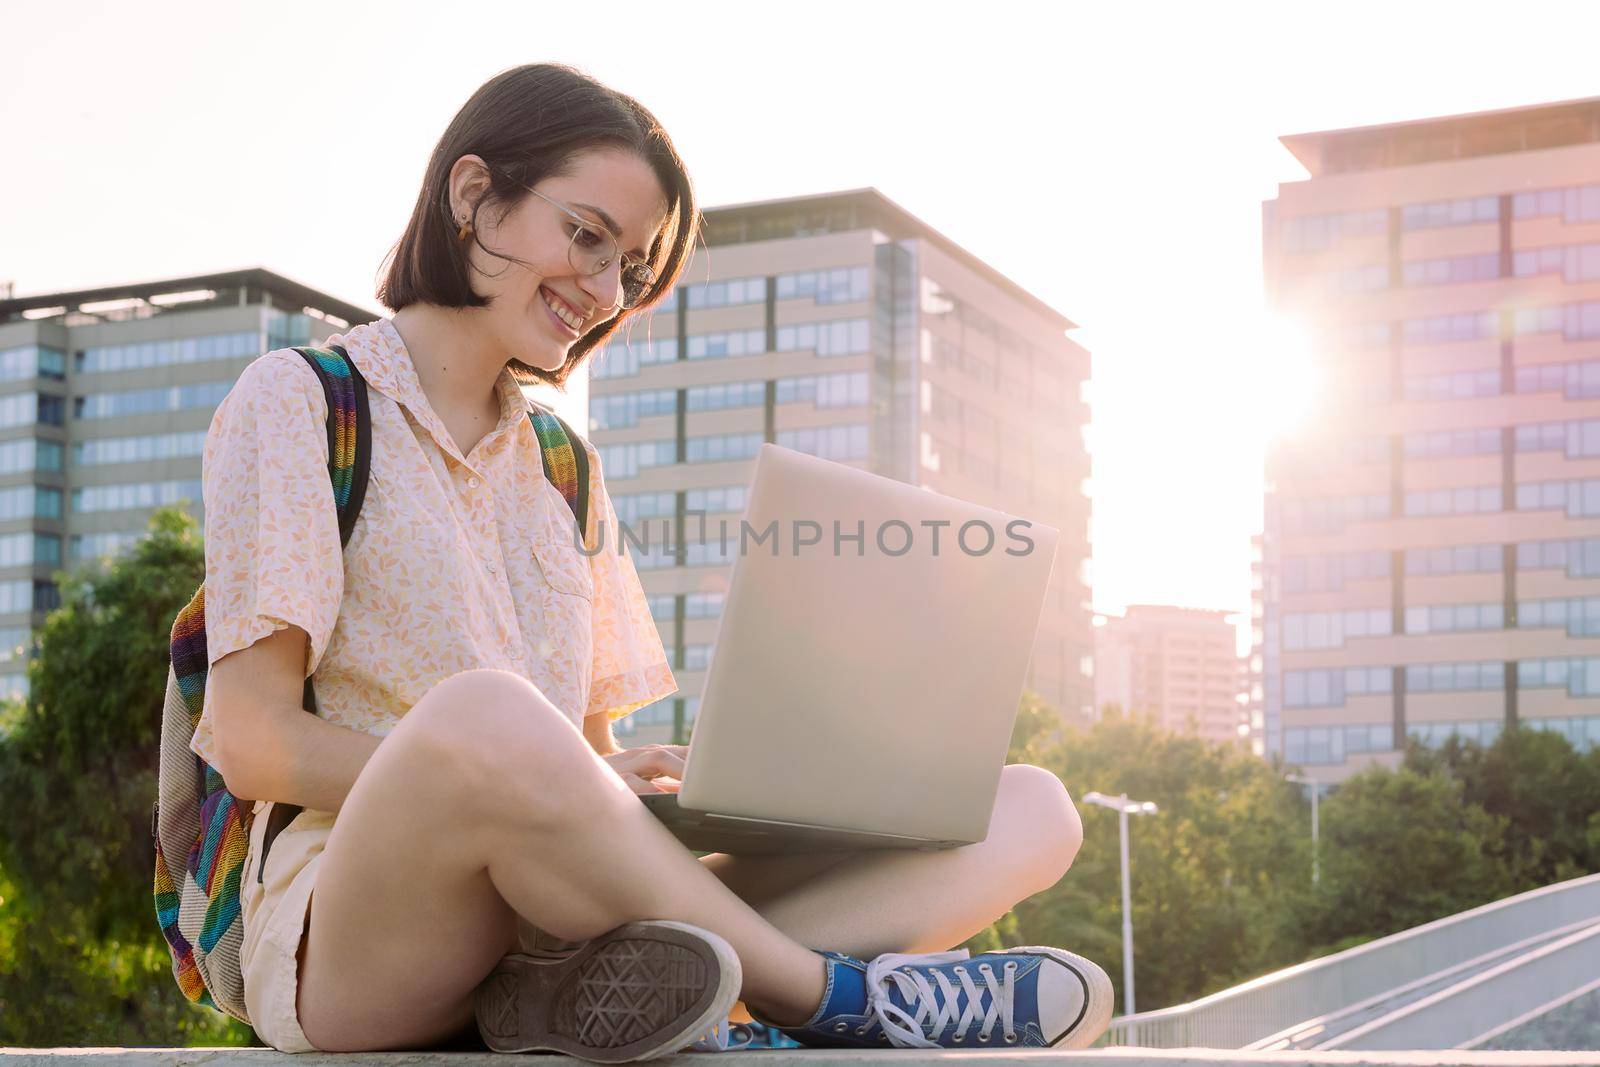 happy young traveler woman with backpack sitting in the city typing on her computer, concept of technology, youth and digital nomad lifestyle, copy space for text